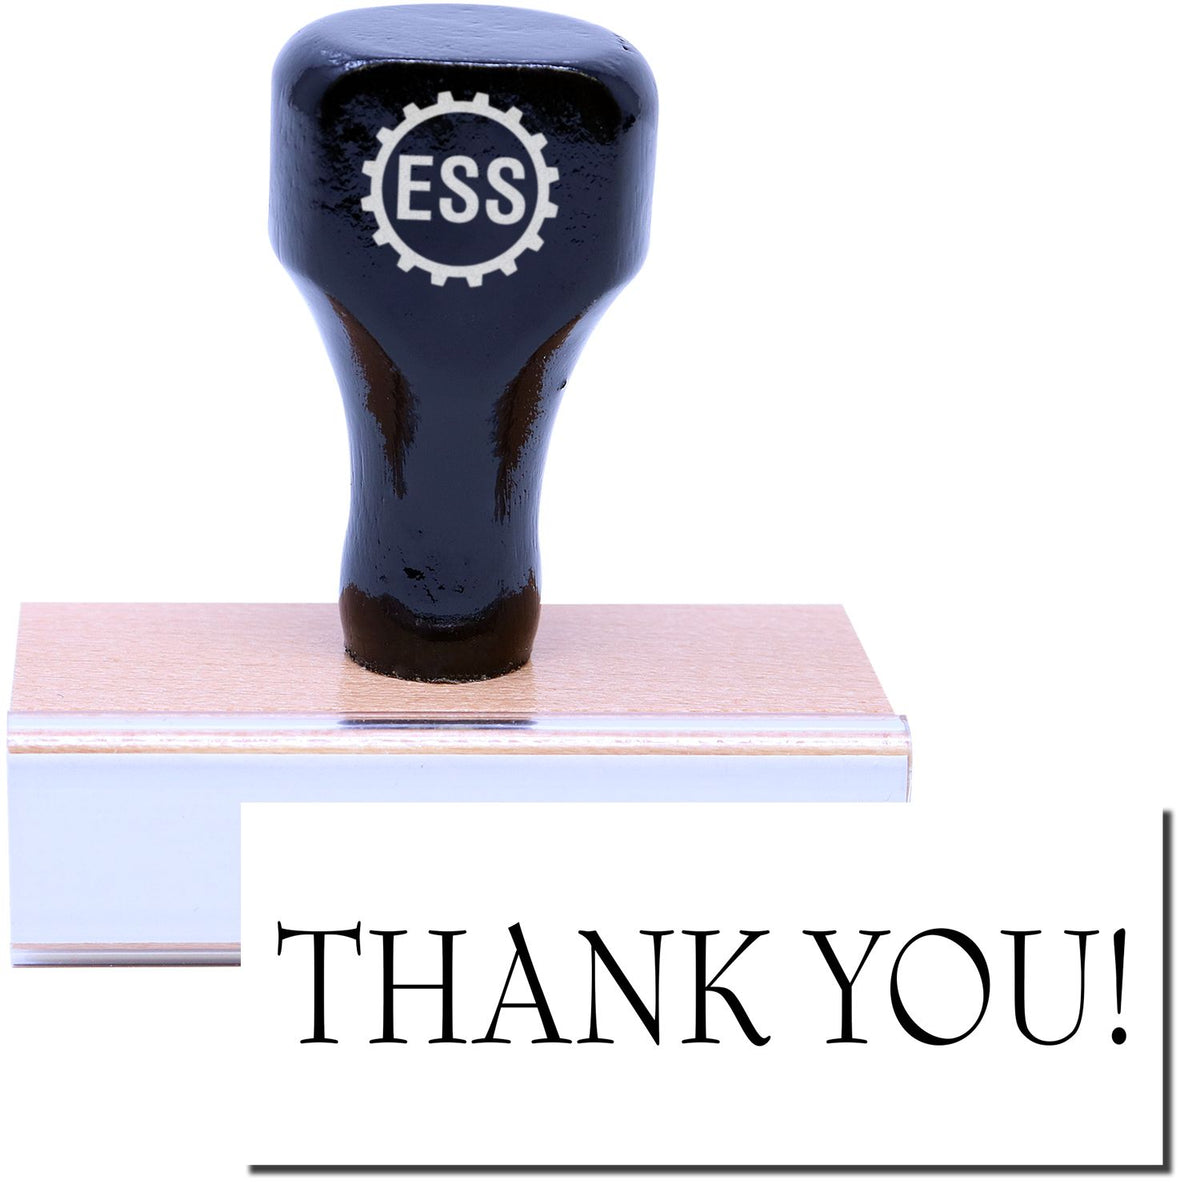 A stock office rubber stamp with a stamped image showing how the text &quot;THANK YOU!&quot; in a large font is displayed after stamping.